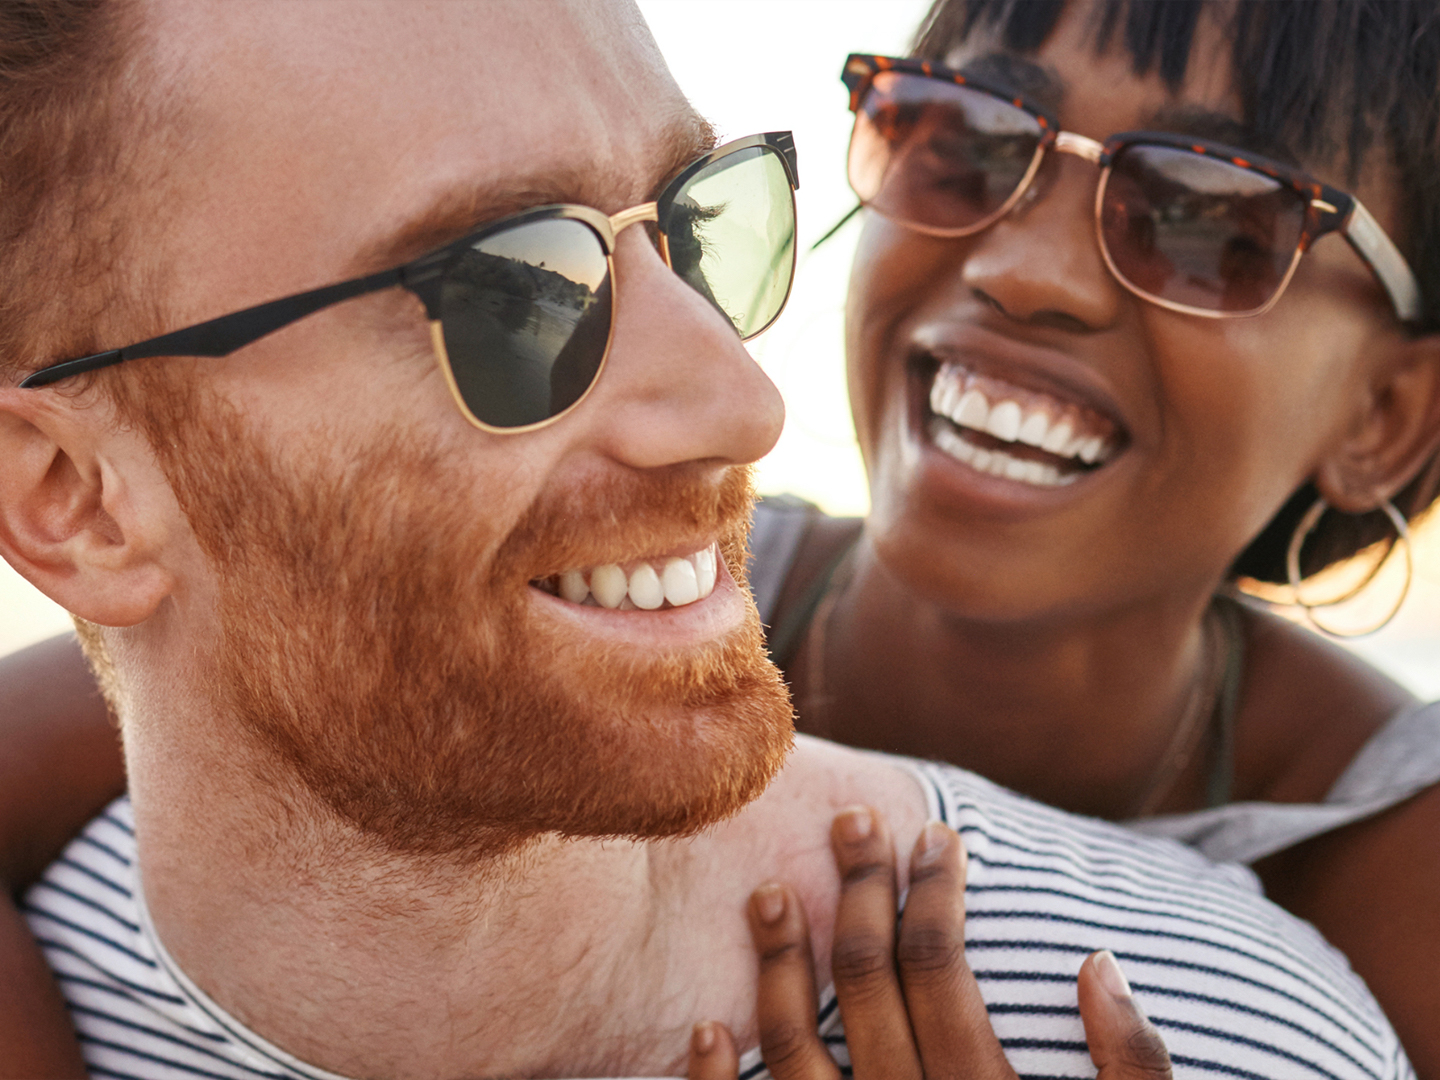 Woman with arms around a man smiling wearing sunglasses.